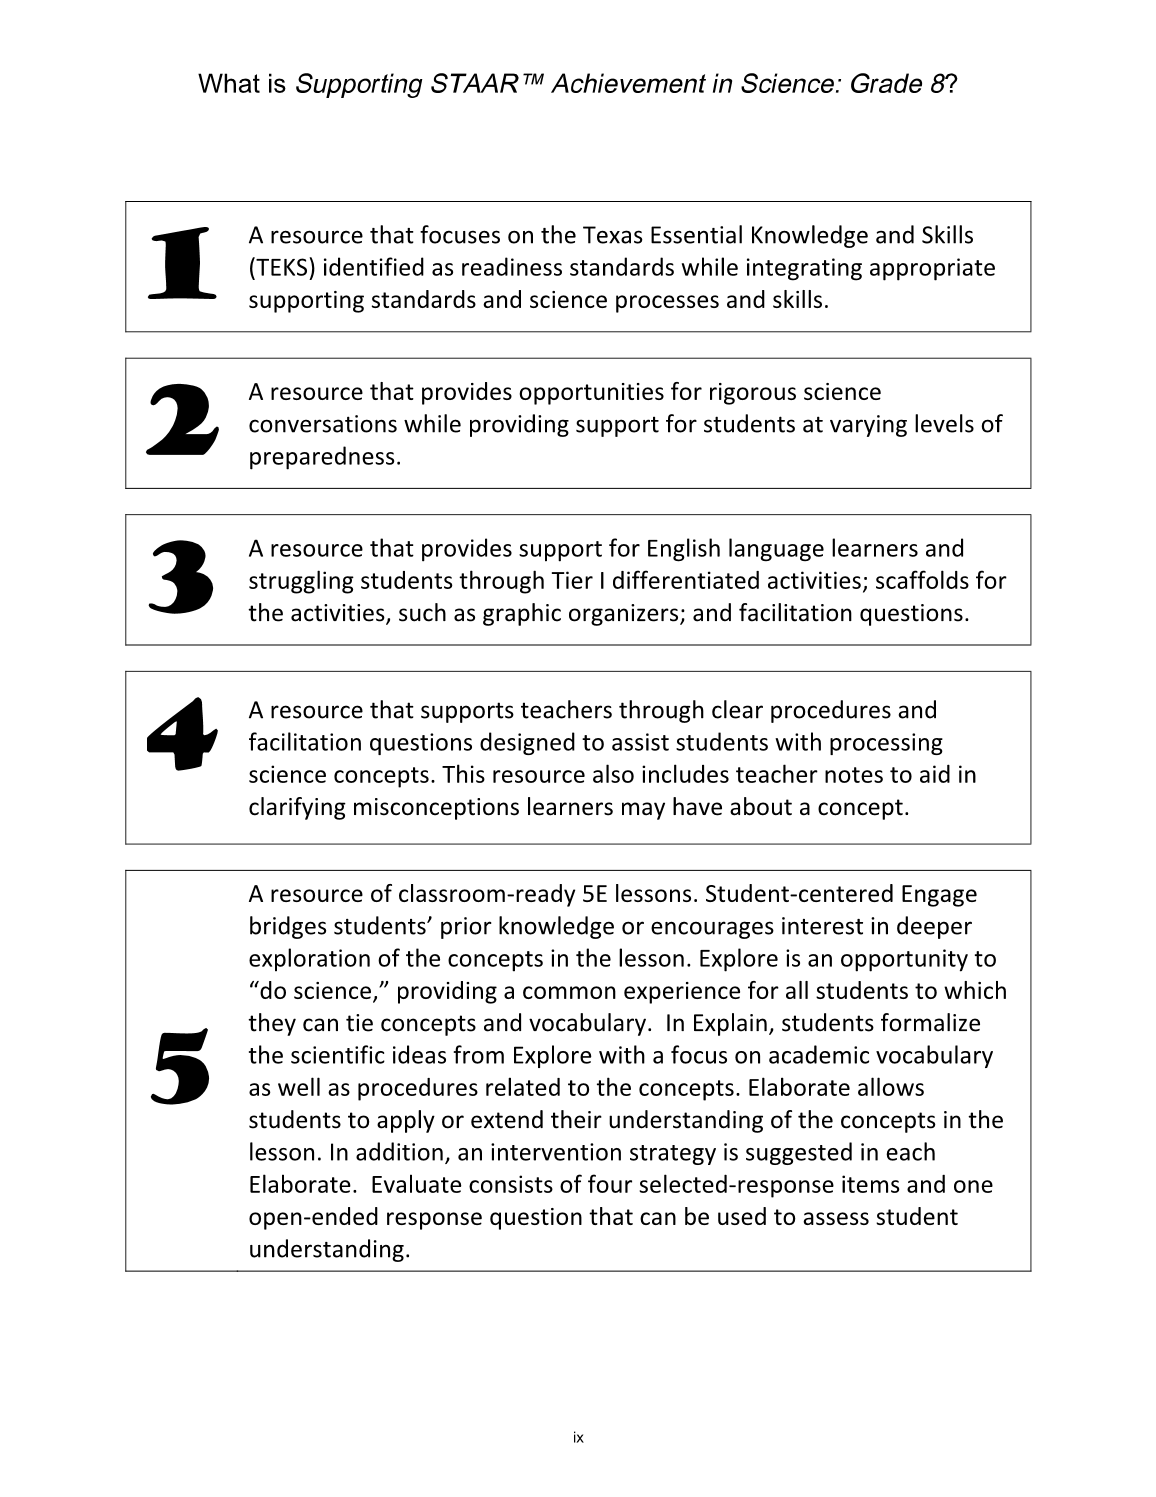 Supporting STAAR® Achievement in Science: Grade 8 page 10